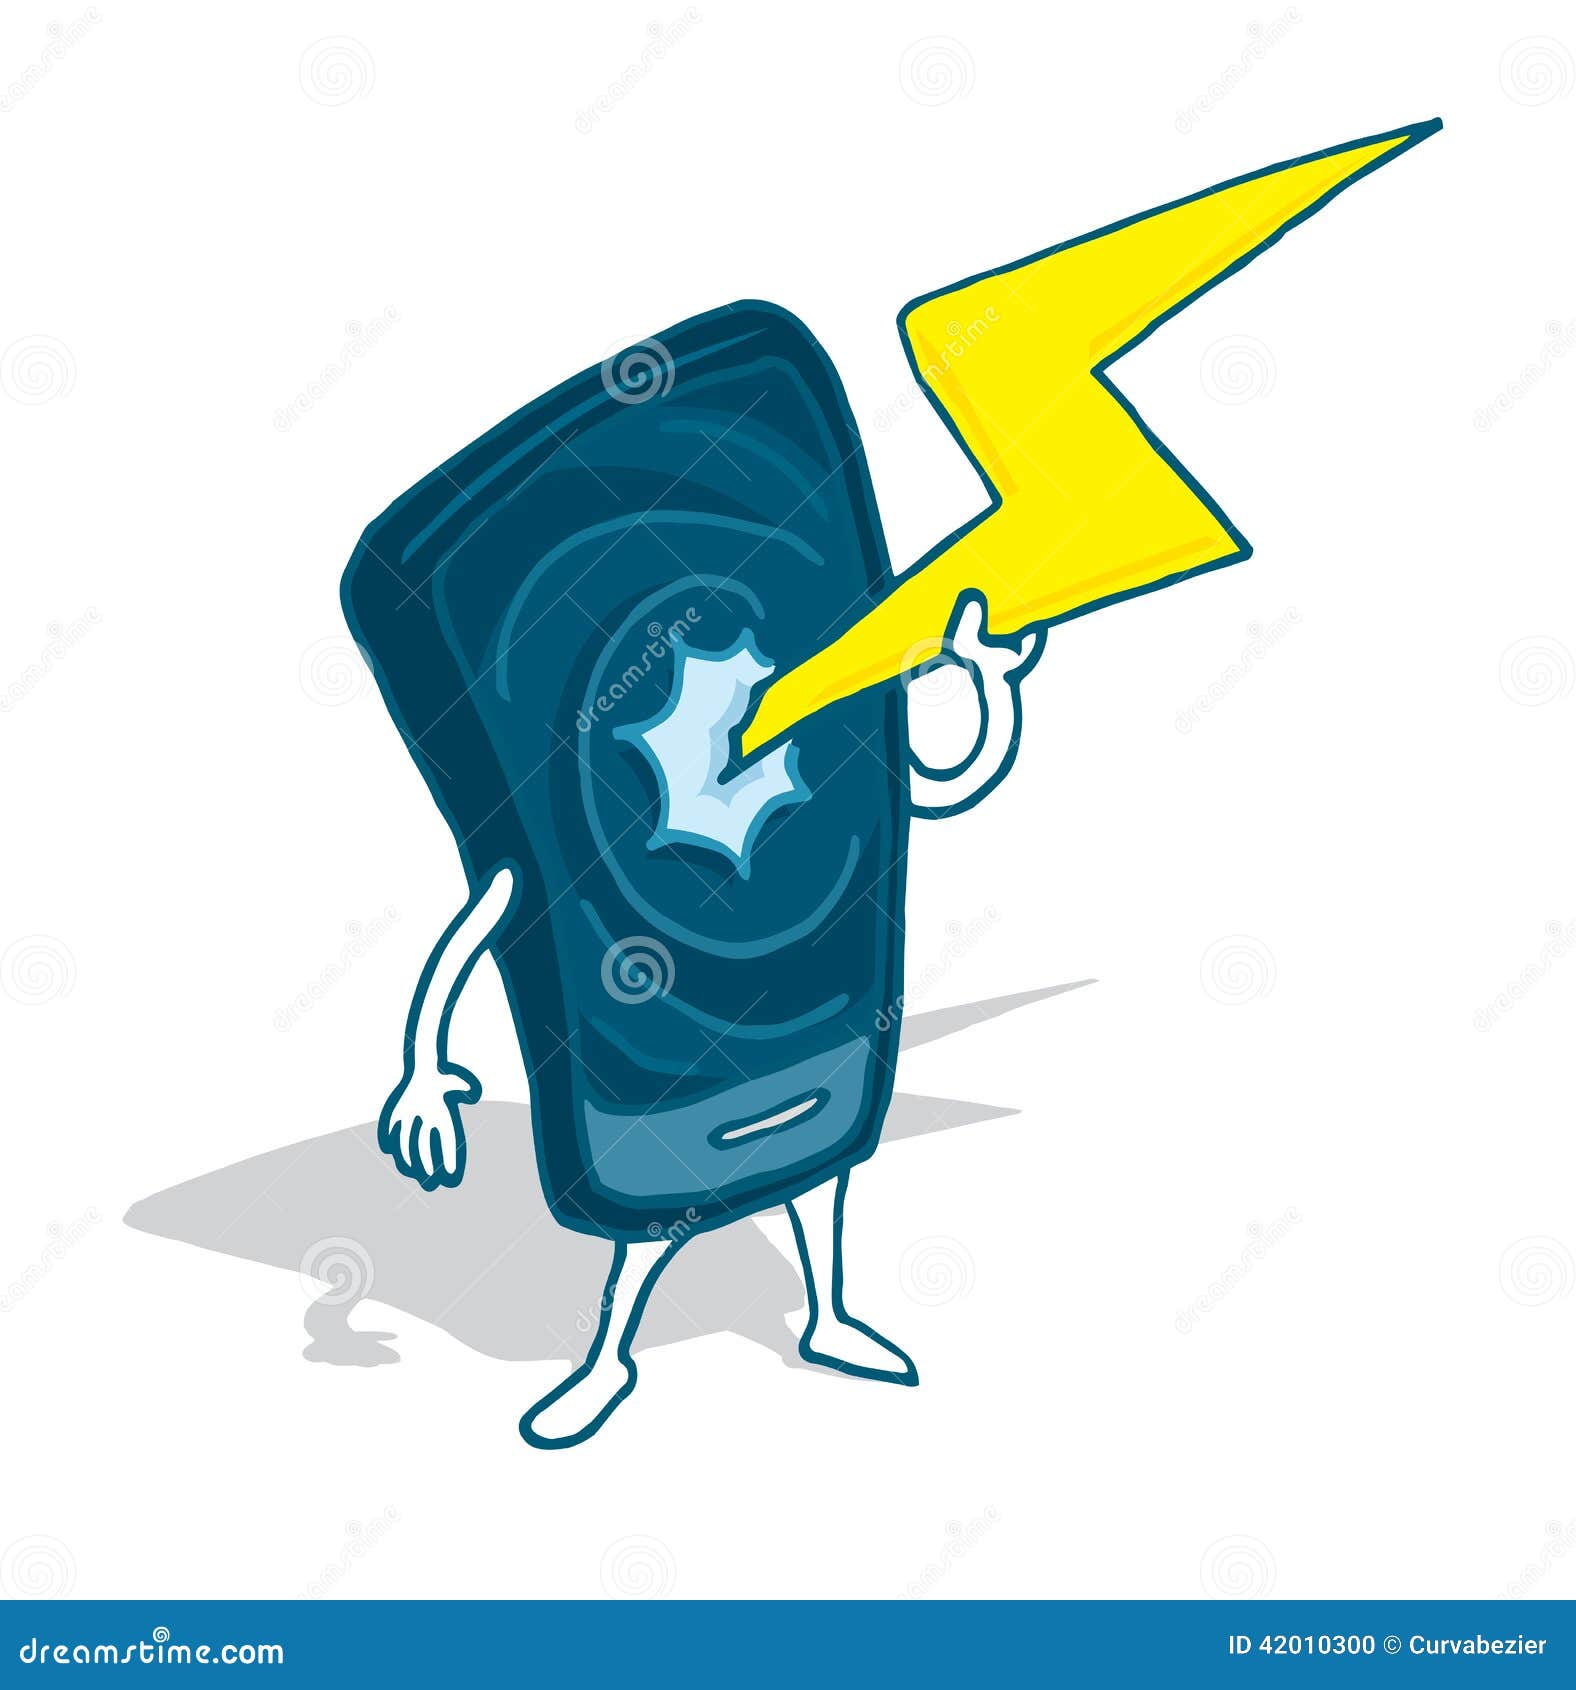 phone charger clipart - photo #47